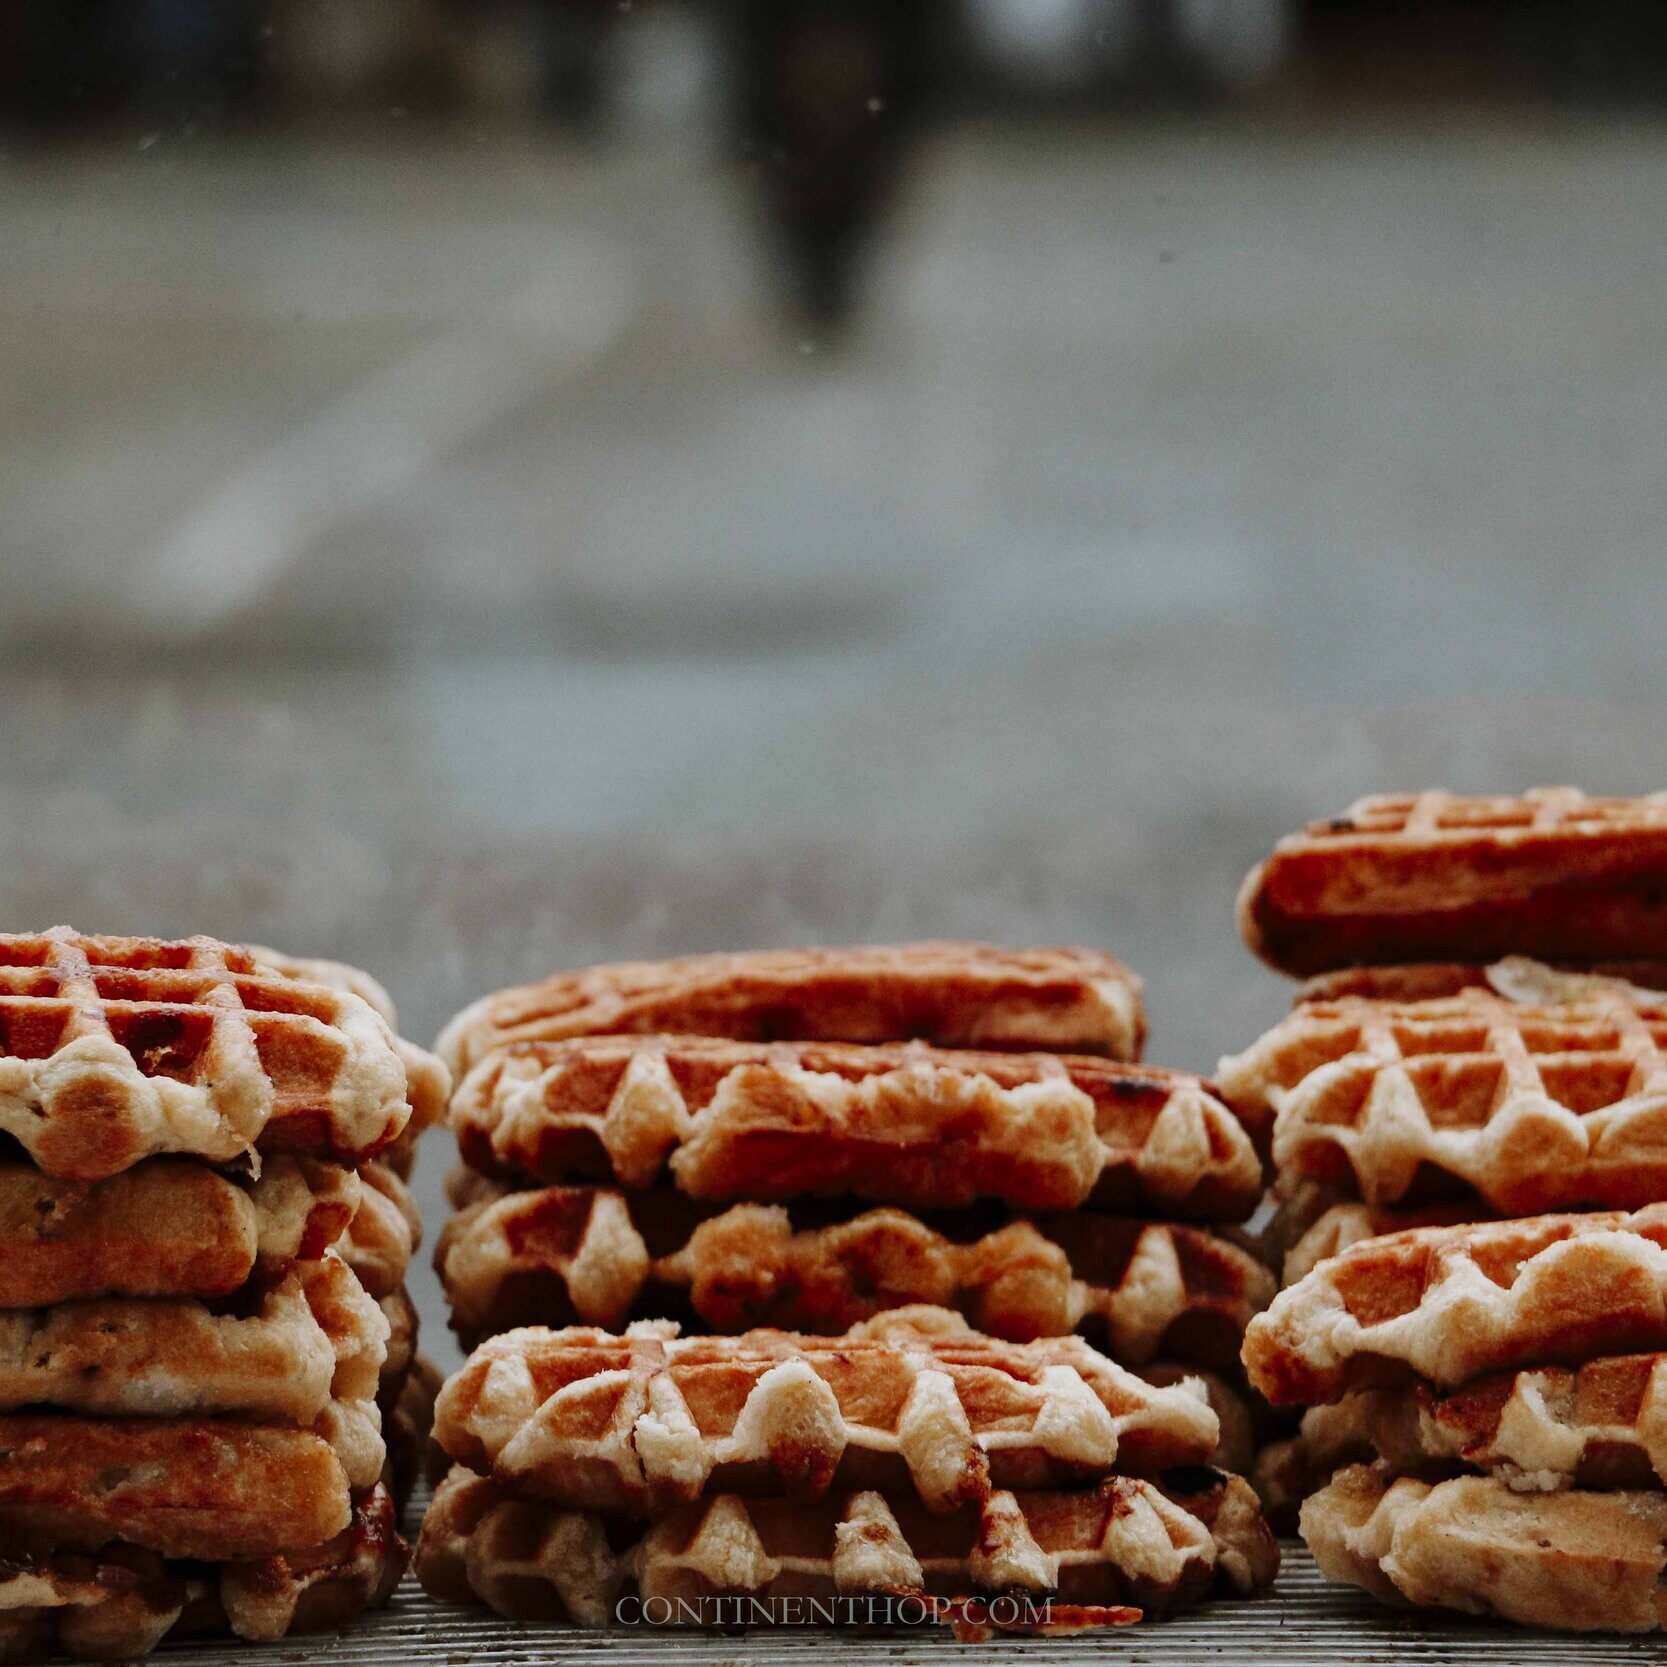 image of a Stack of freshly made waffles in Gent